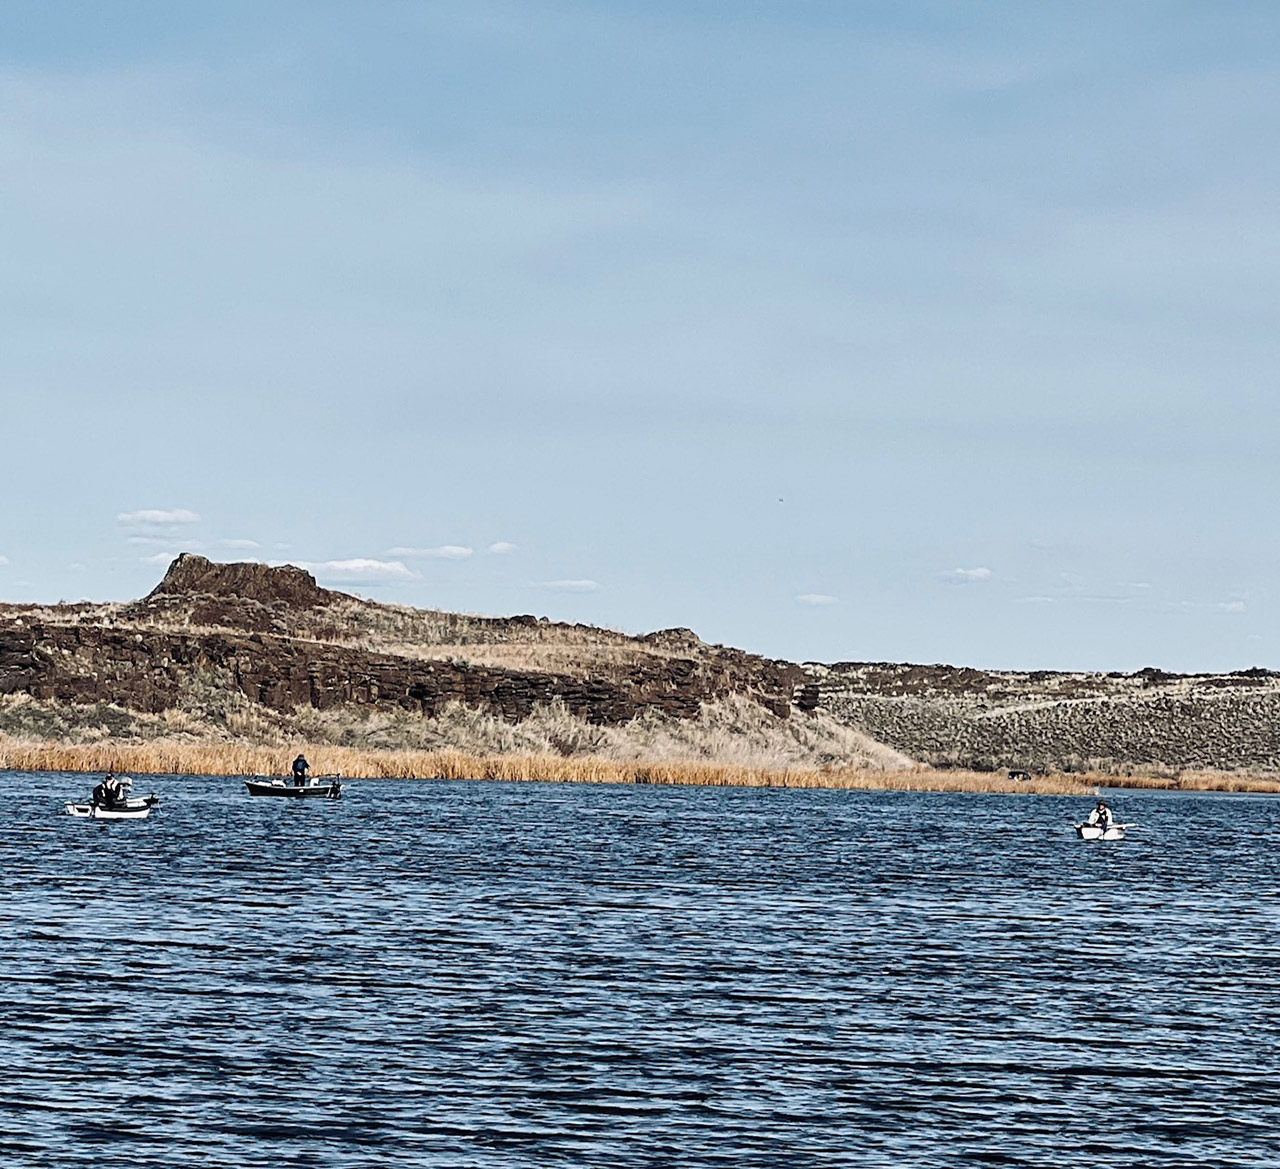 This week's photo is of the fly fishers on Quincy Lake.